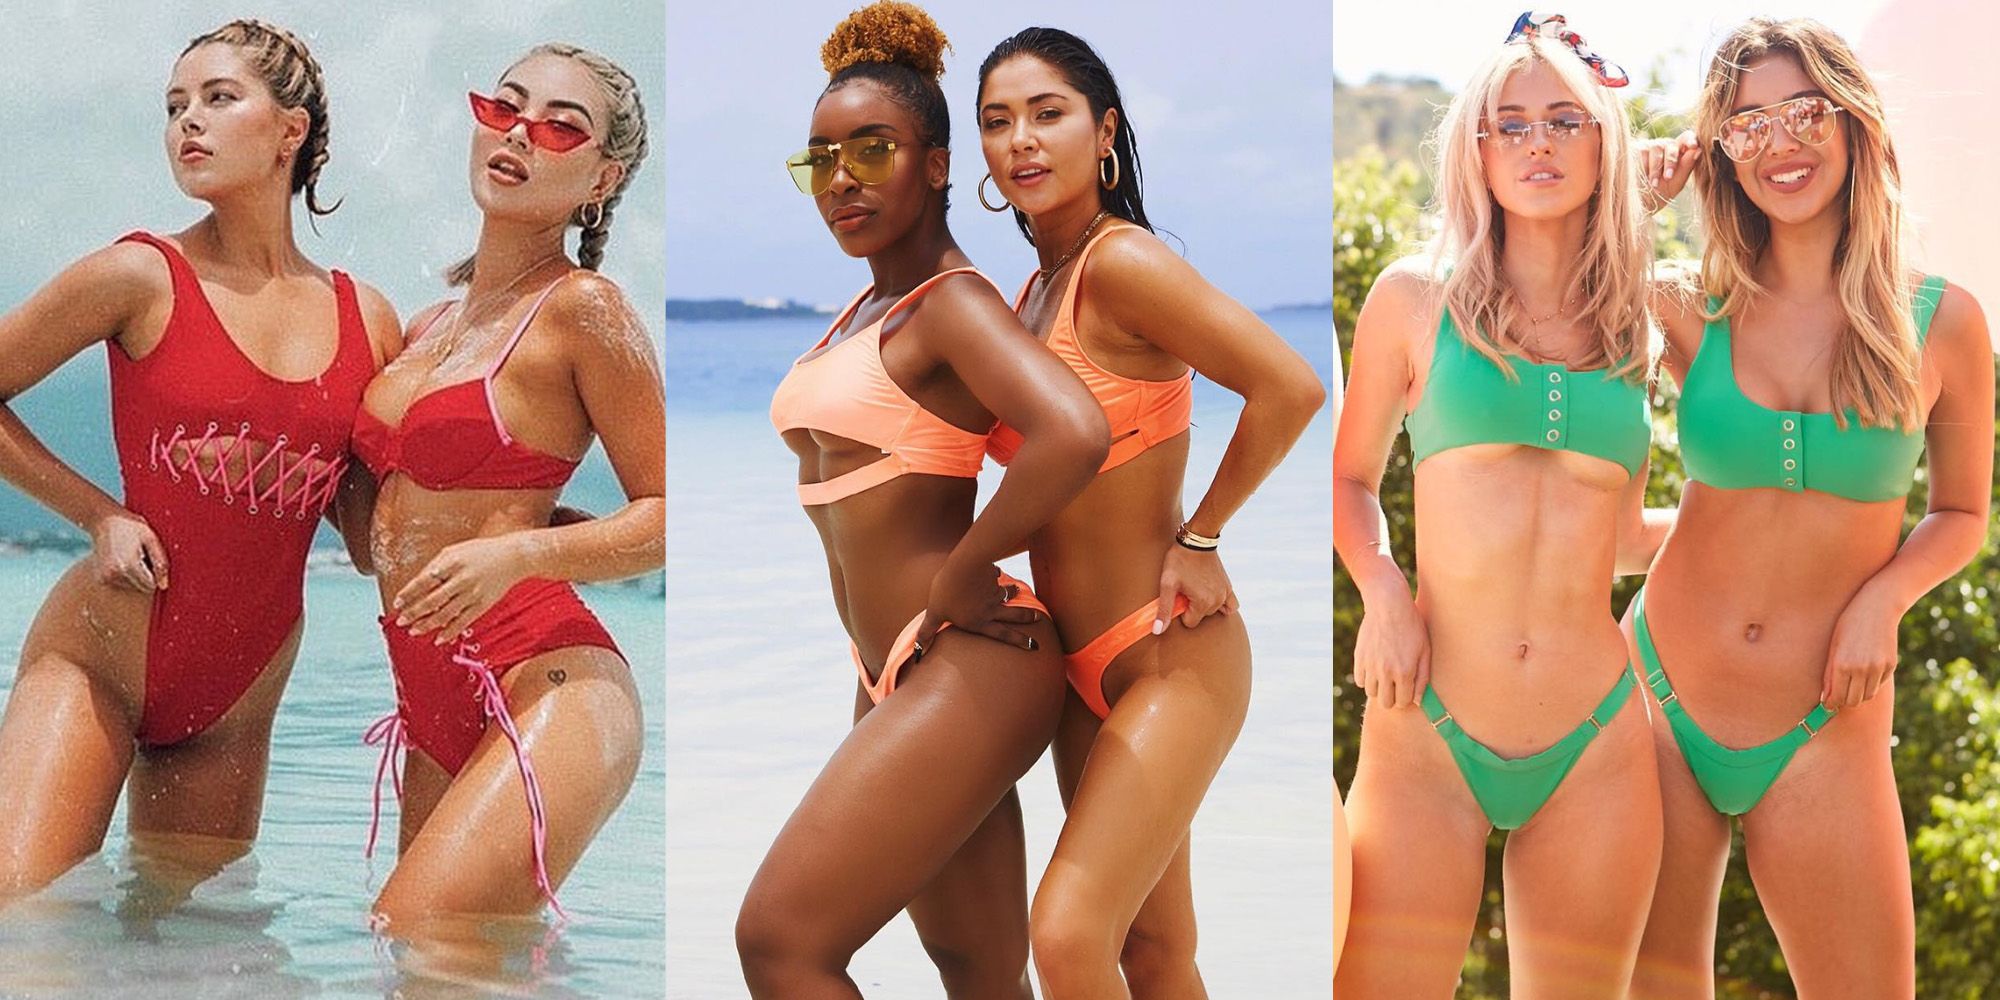 Now Is the Time to Commit to Butt-Baring Swimwear